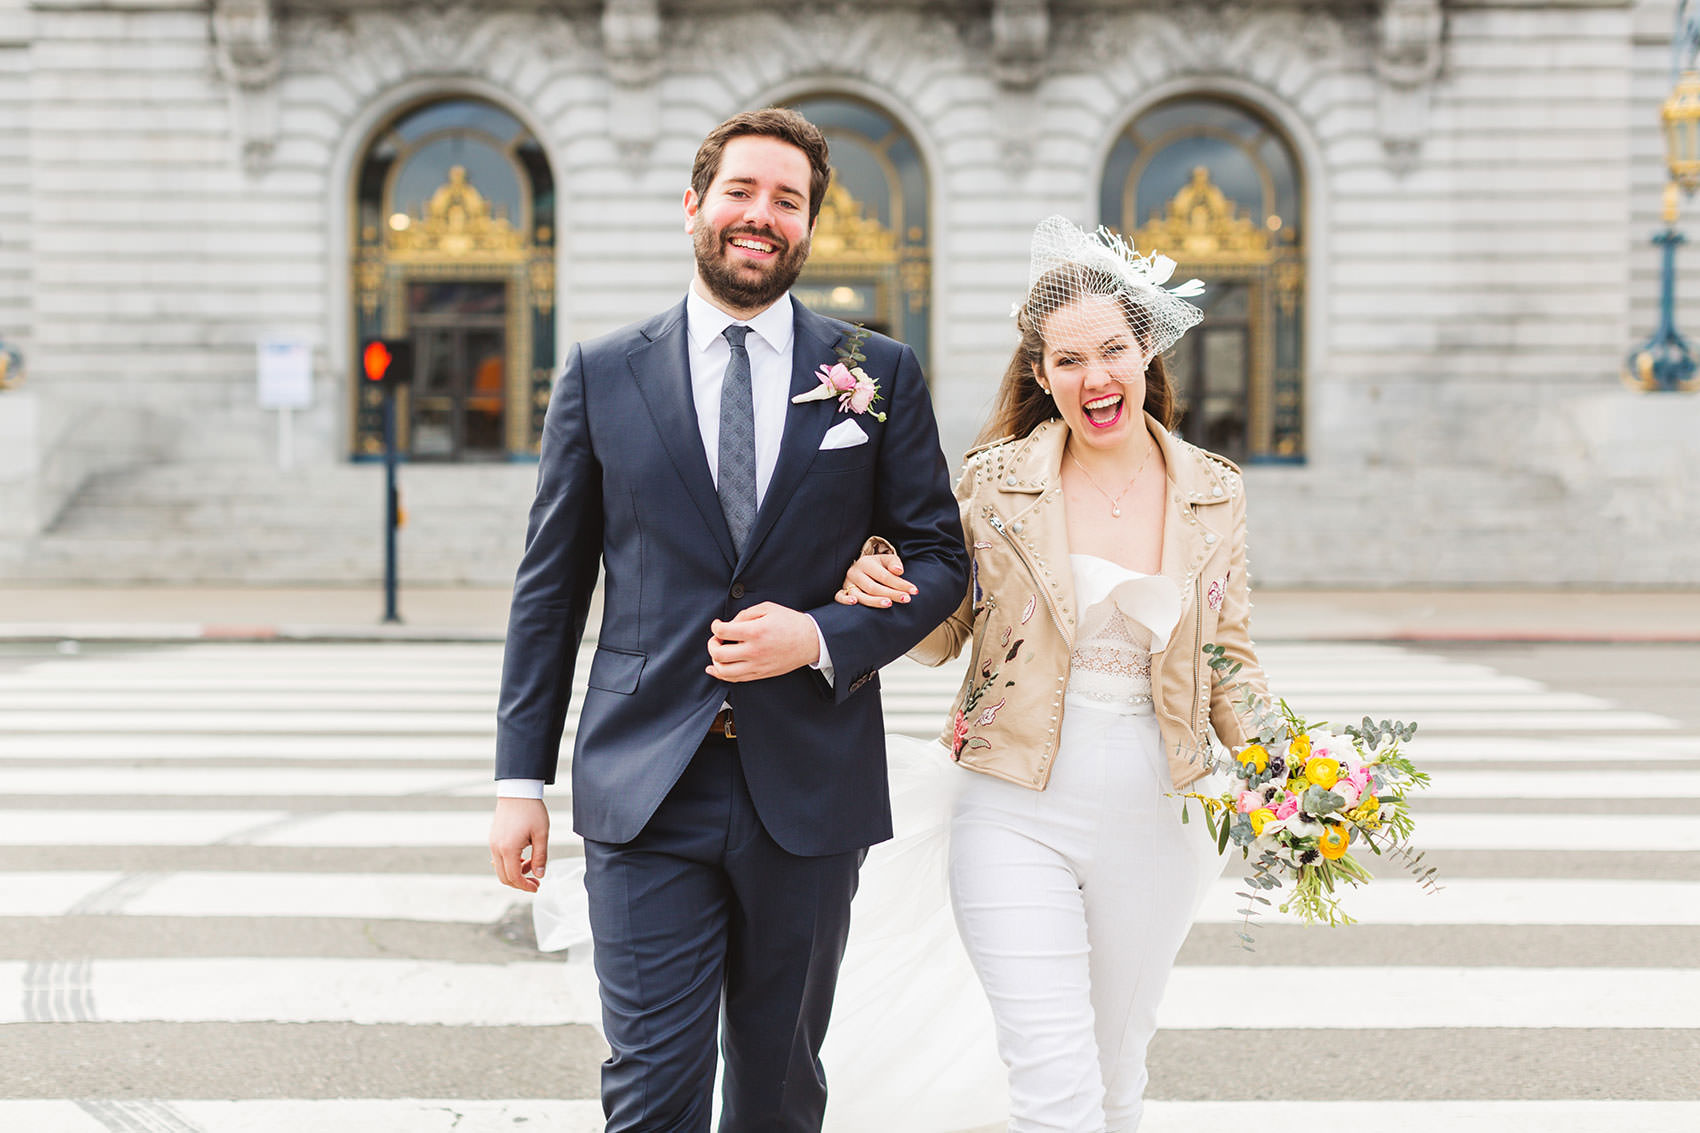 How to get married at San Francisco City Hall - Official Guide by Zoe Larkin Photography